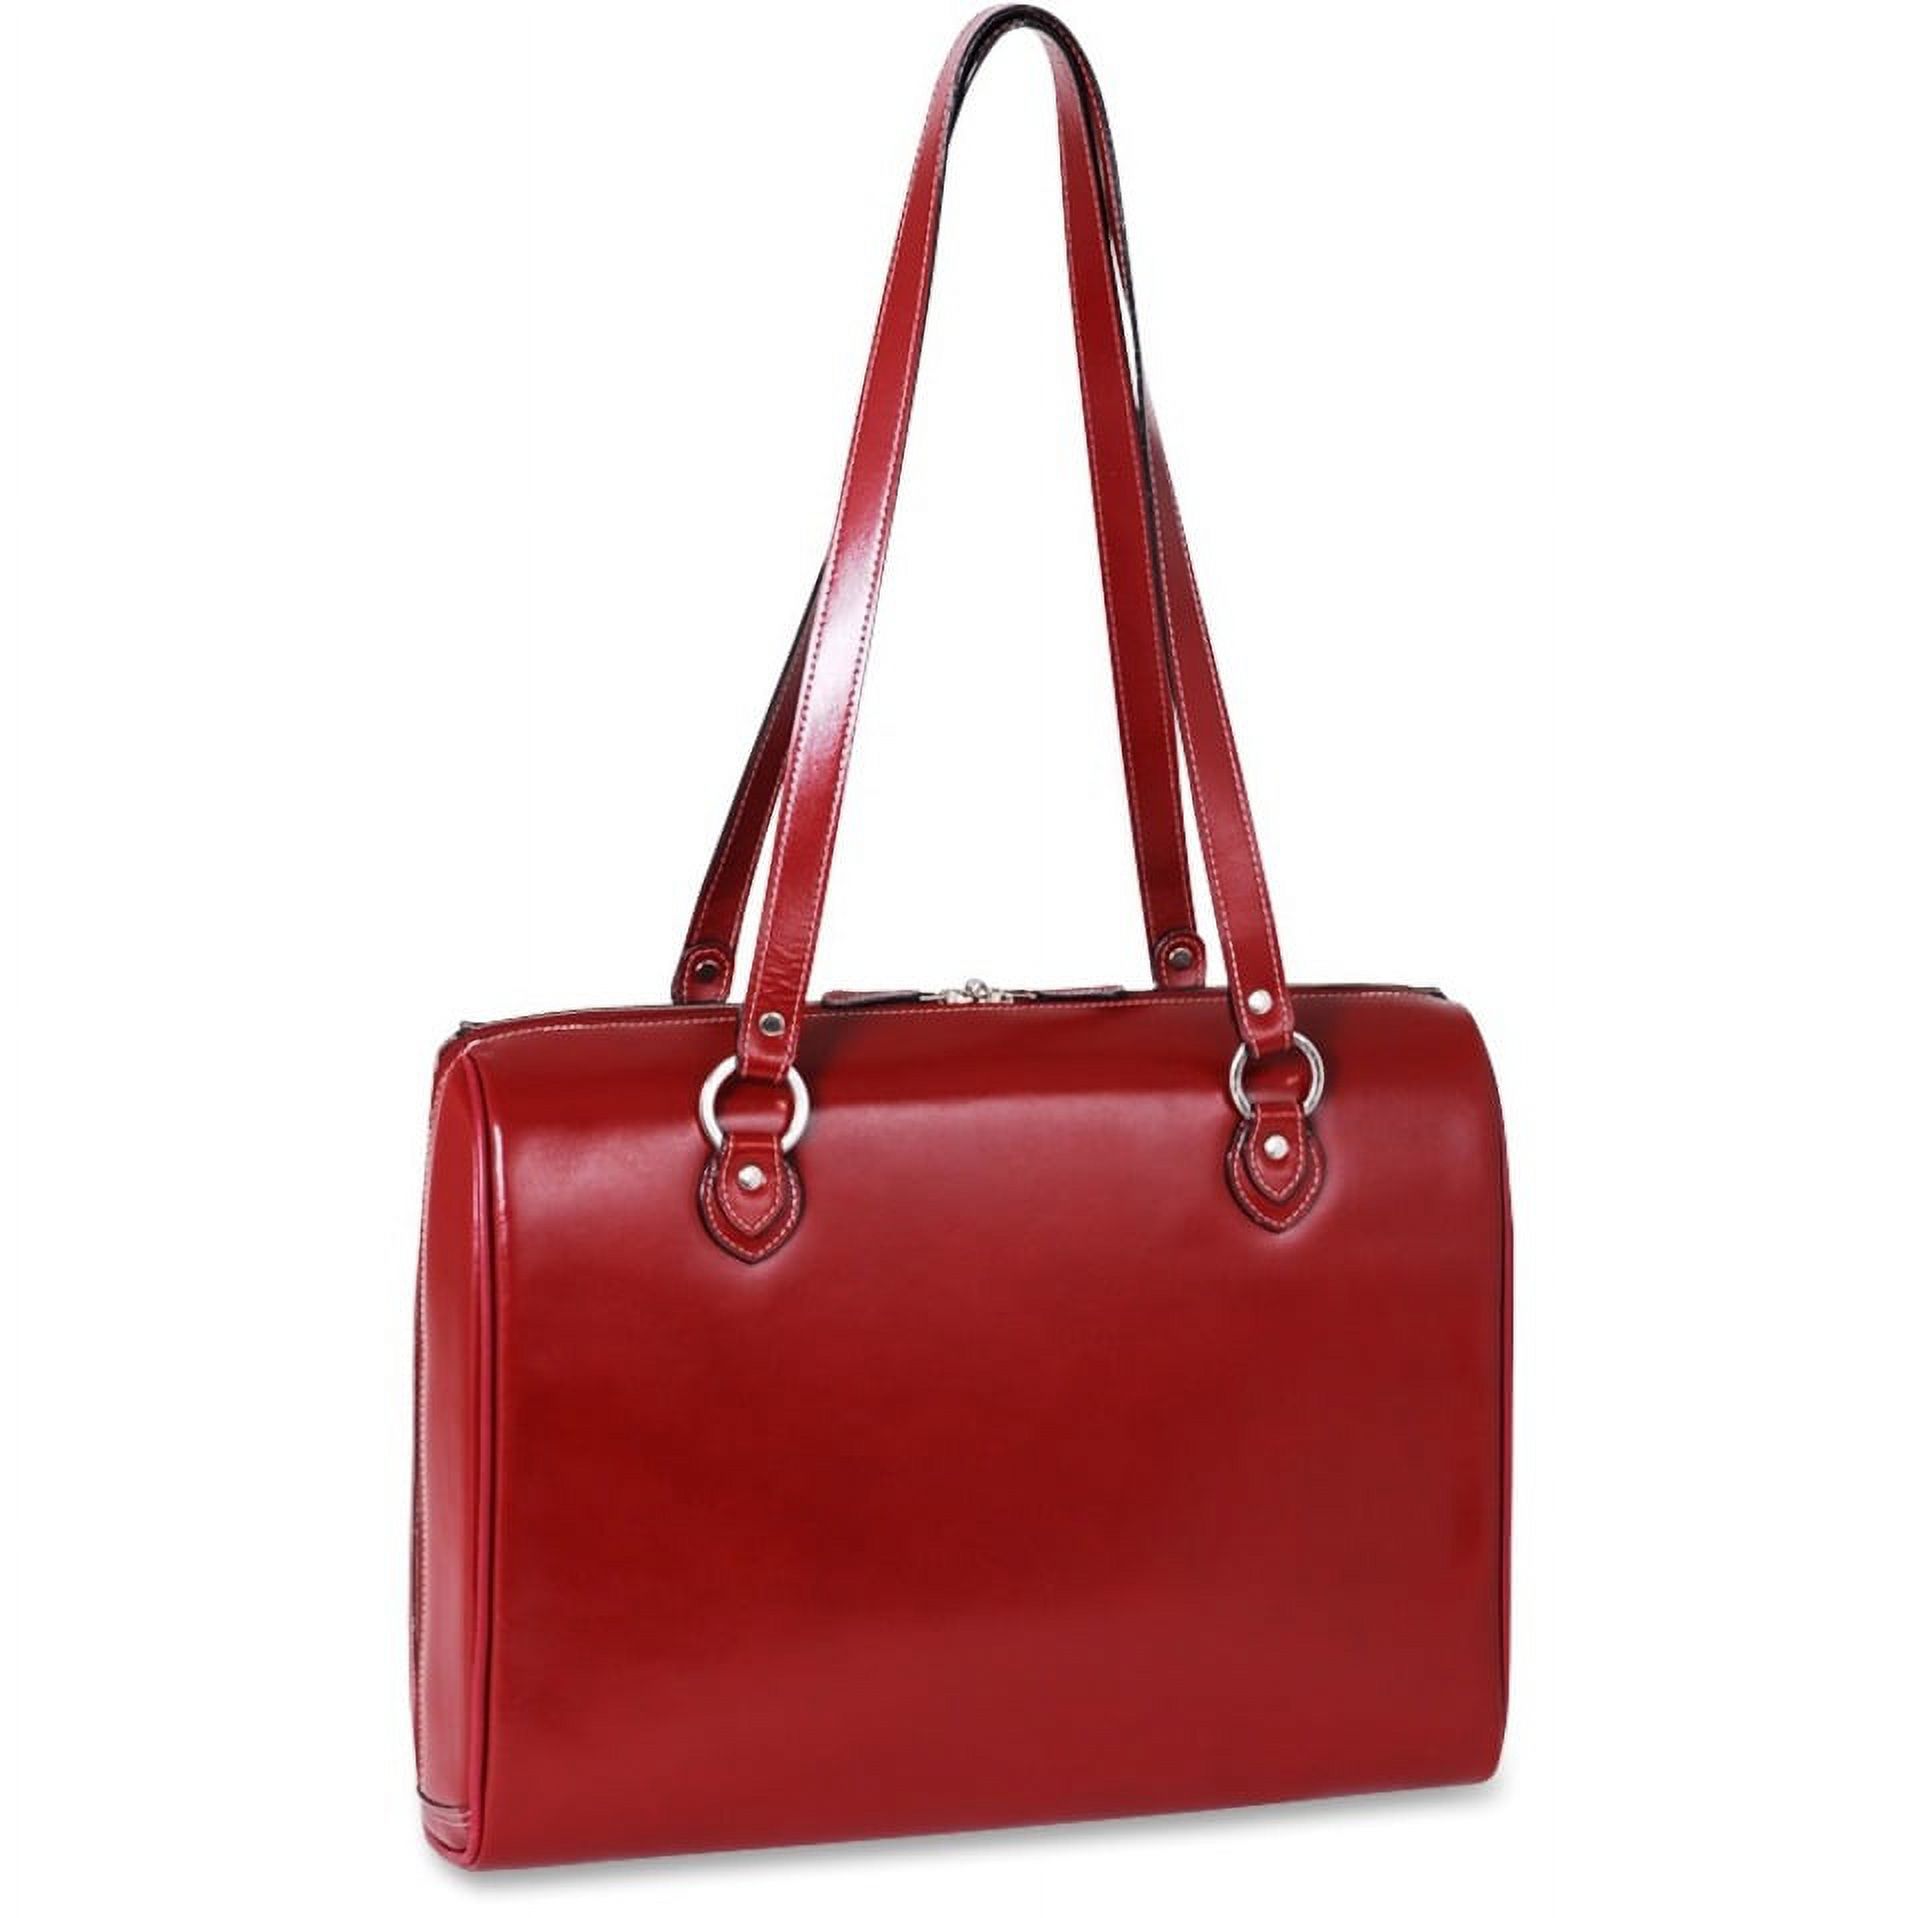 McKlein GLENVIEW, Ladies' Laptop Briefcase, Top Grain Cowhide Leather, Red (94746) - image 2 of 5